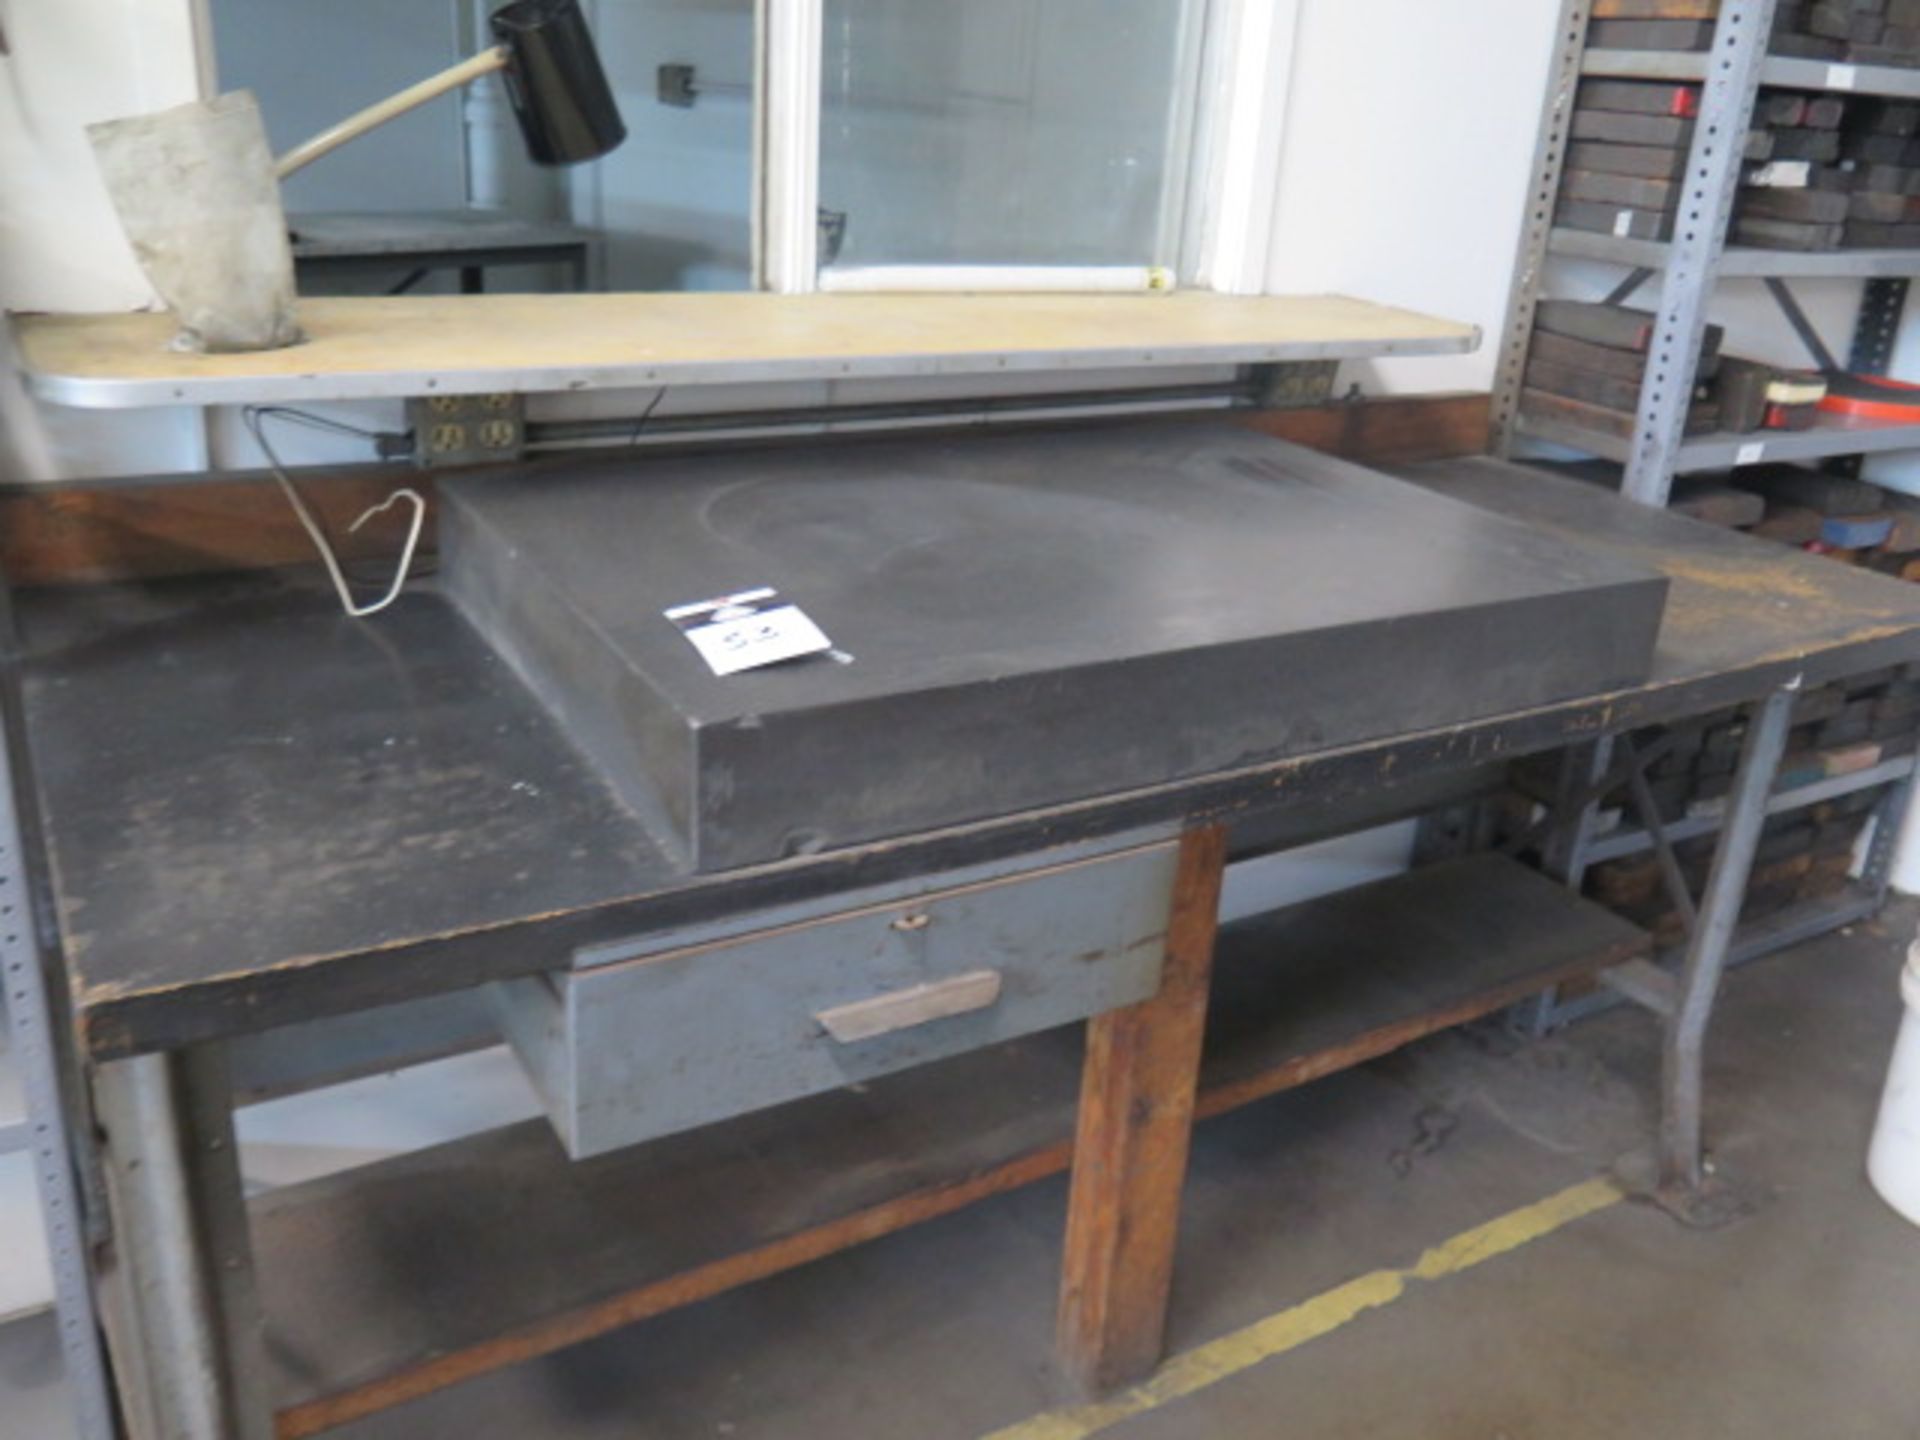 24" x 36" x 4" Granite Surface Plate w/ Table (SOLD AS-IS - NO WARRANTY)